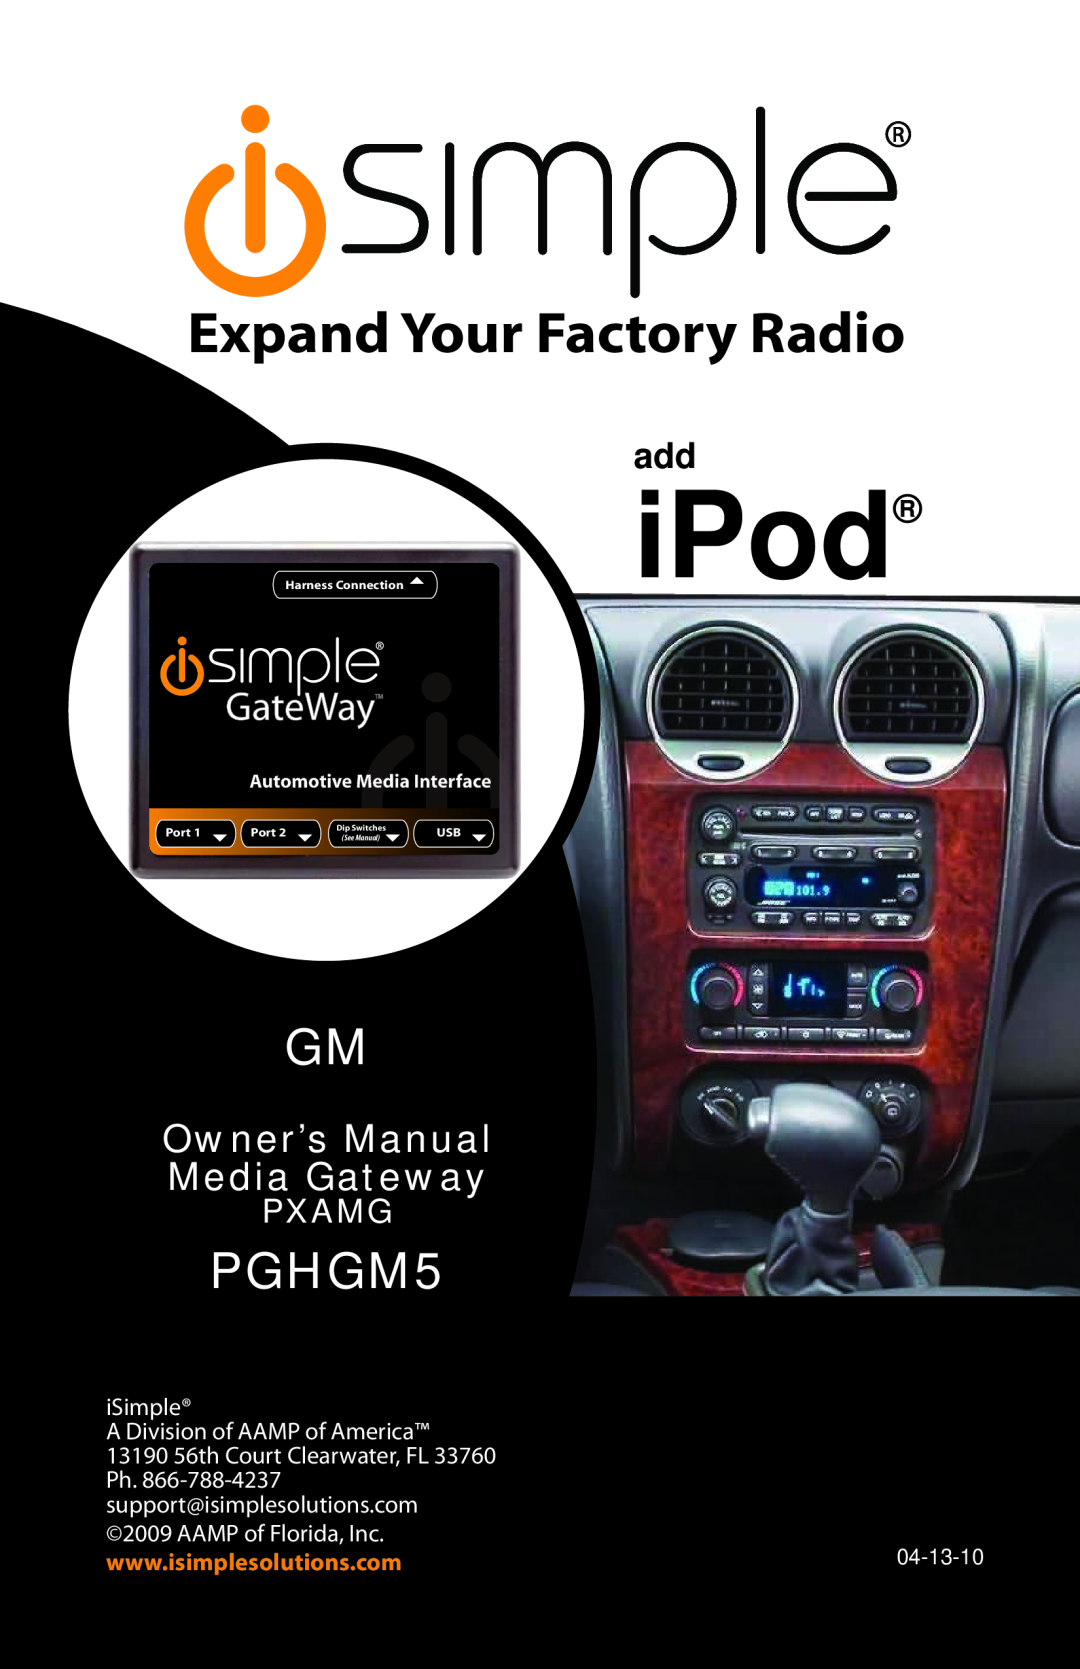 iSimple PGHHY1 owner manual Pxaux, For use with, PGHFD1 PGHGM1 PGHGM2 PGHGM3 PGHGM4 PGHGM5 PGHHD1, AAMP of Florida, Inc 